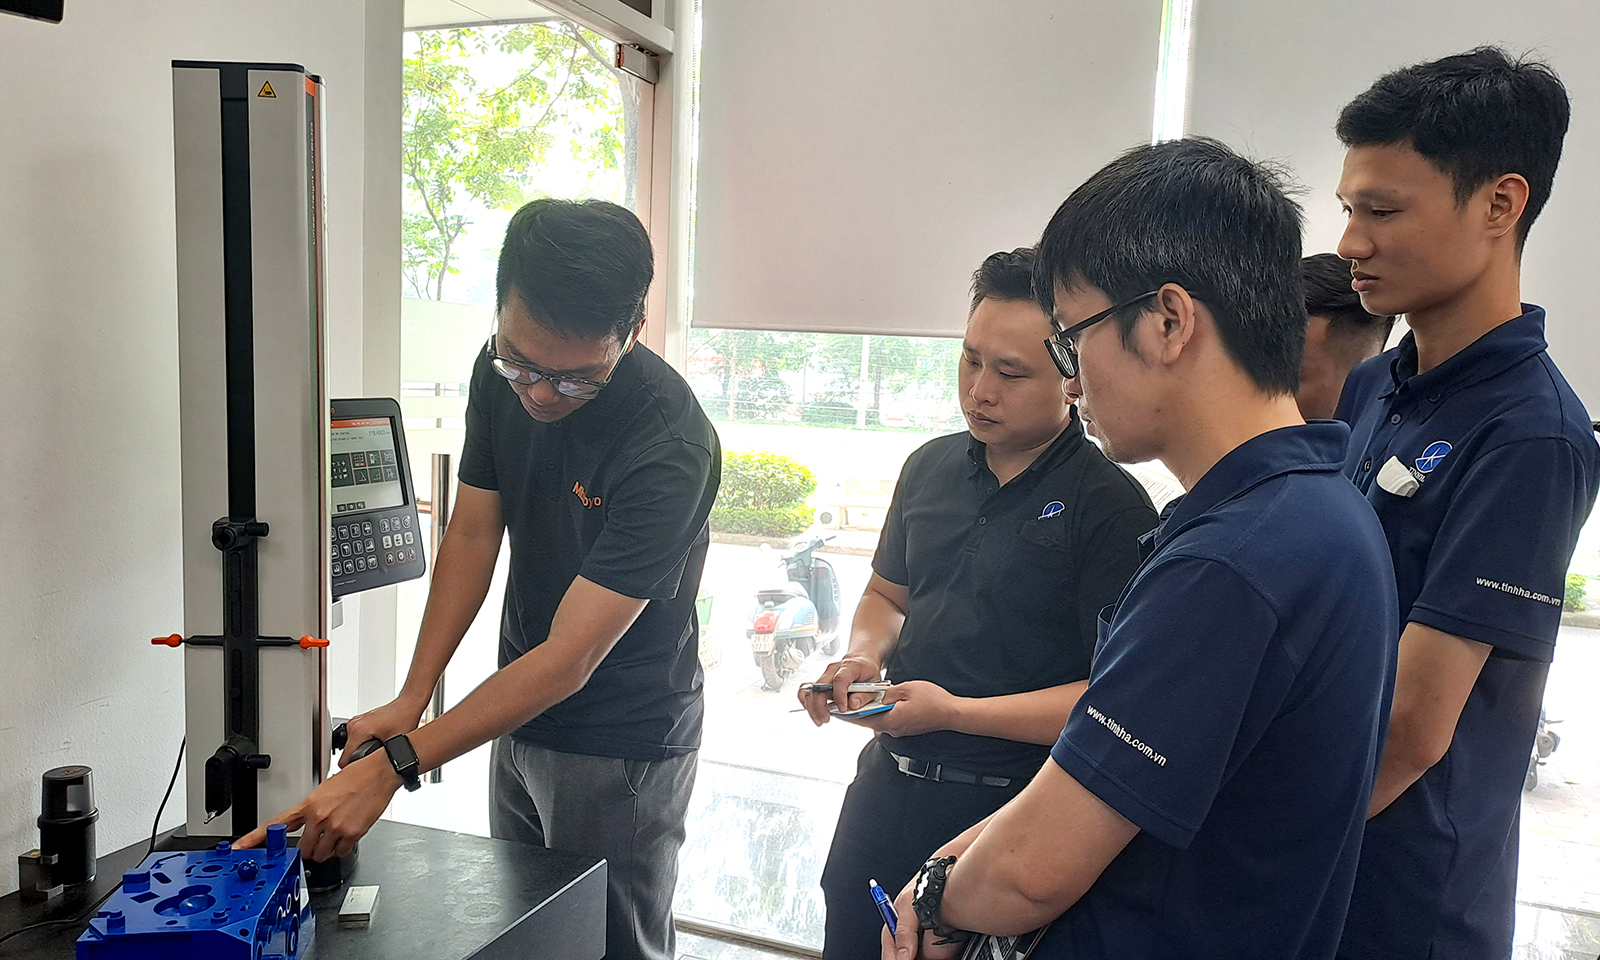 TRAINING SESSION ON MITUTOYO DIGITAL HEIGHT GAGE – LH-600FG SERIES FOR OFFICIAL AGENT TINH HA